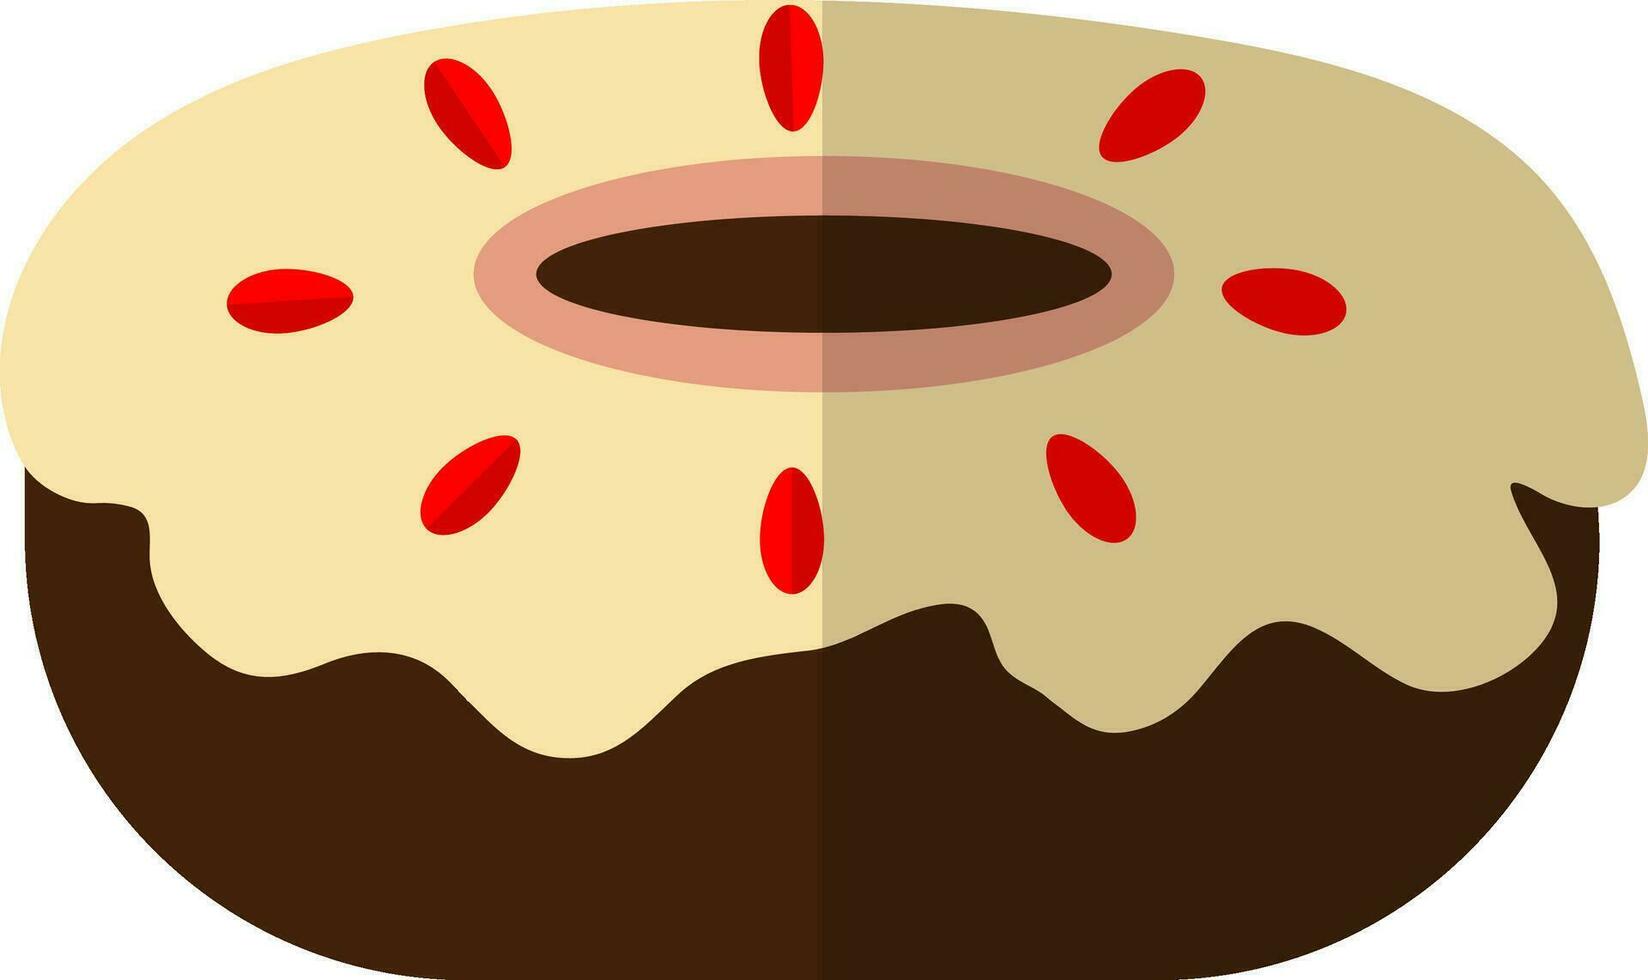 Brown donut in flat style. vector